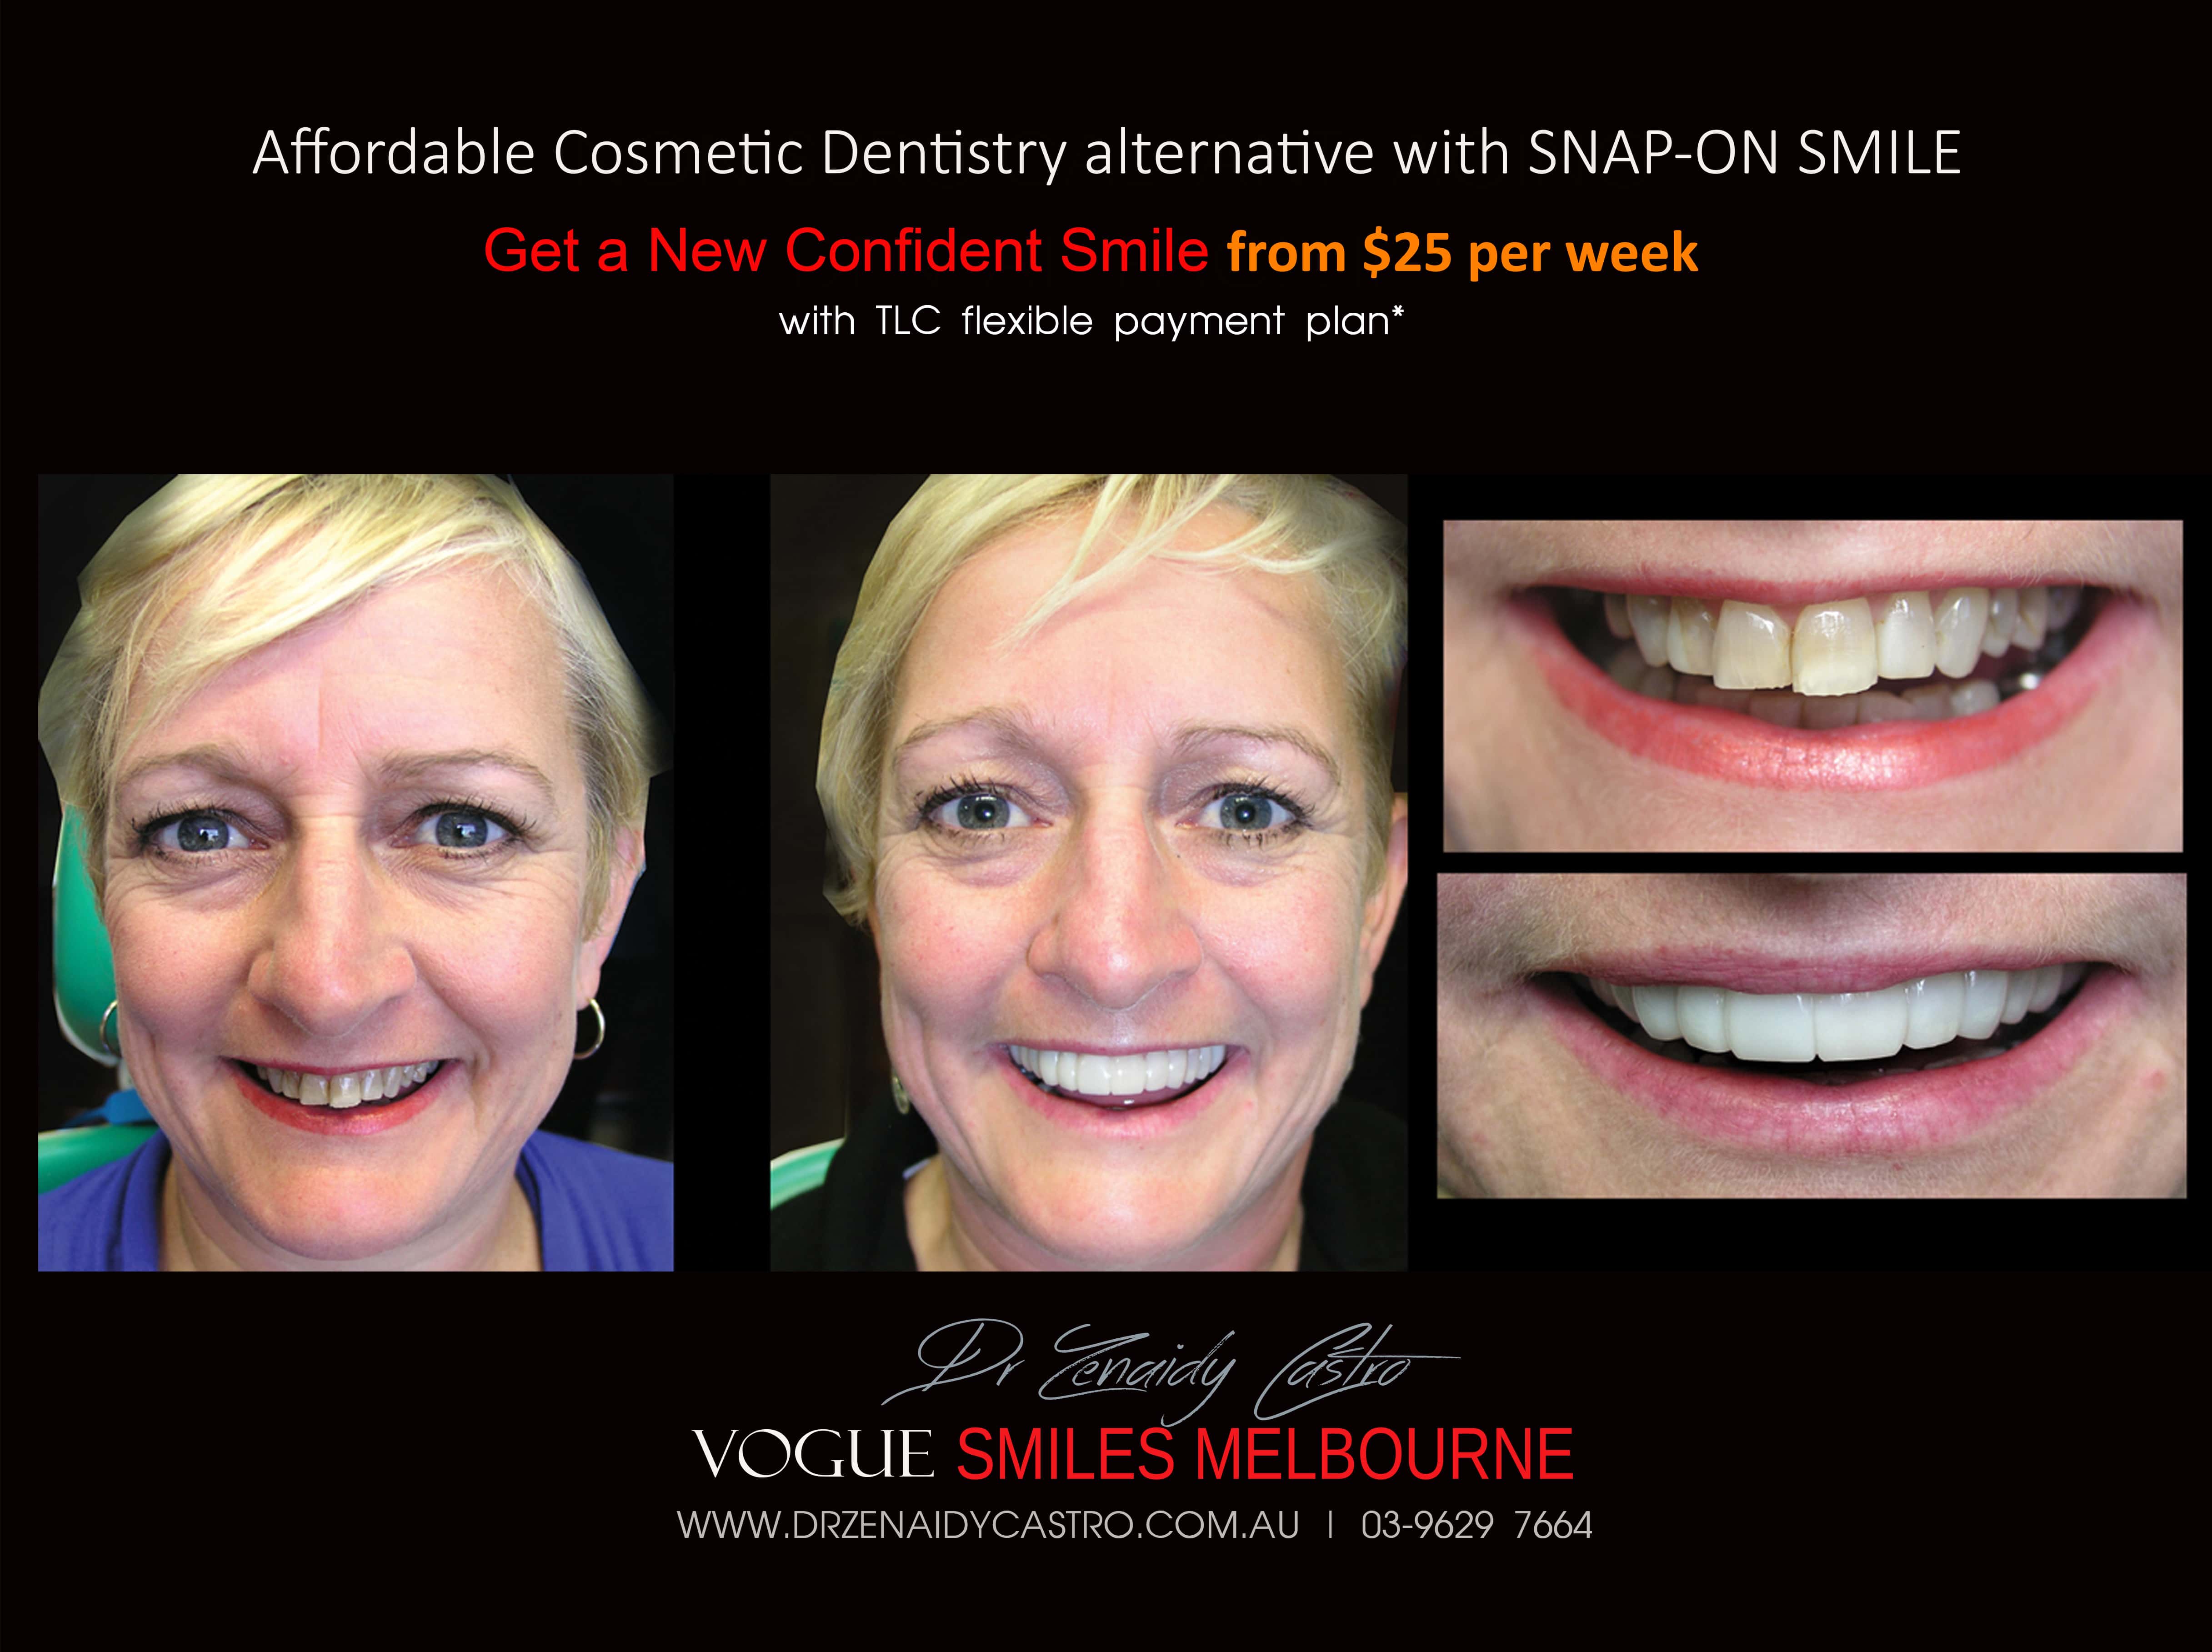 Cosmetic Dentistry Procedures and Treatments Melbourne CBD - Best Cosmetic Dentists in Melbourne, VIC -leading Australian Cosmetic Dentist